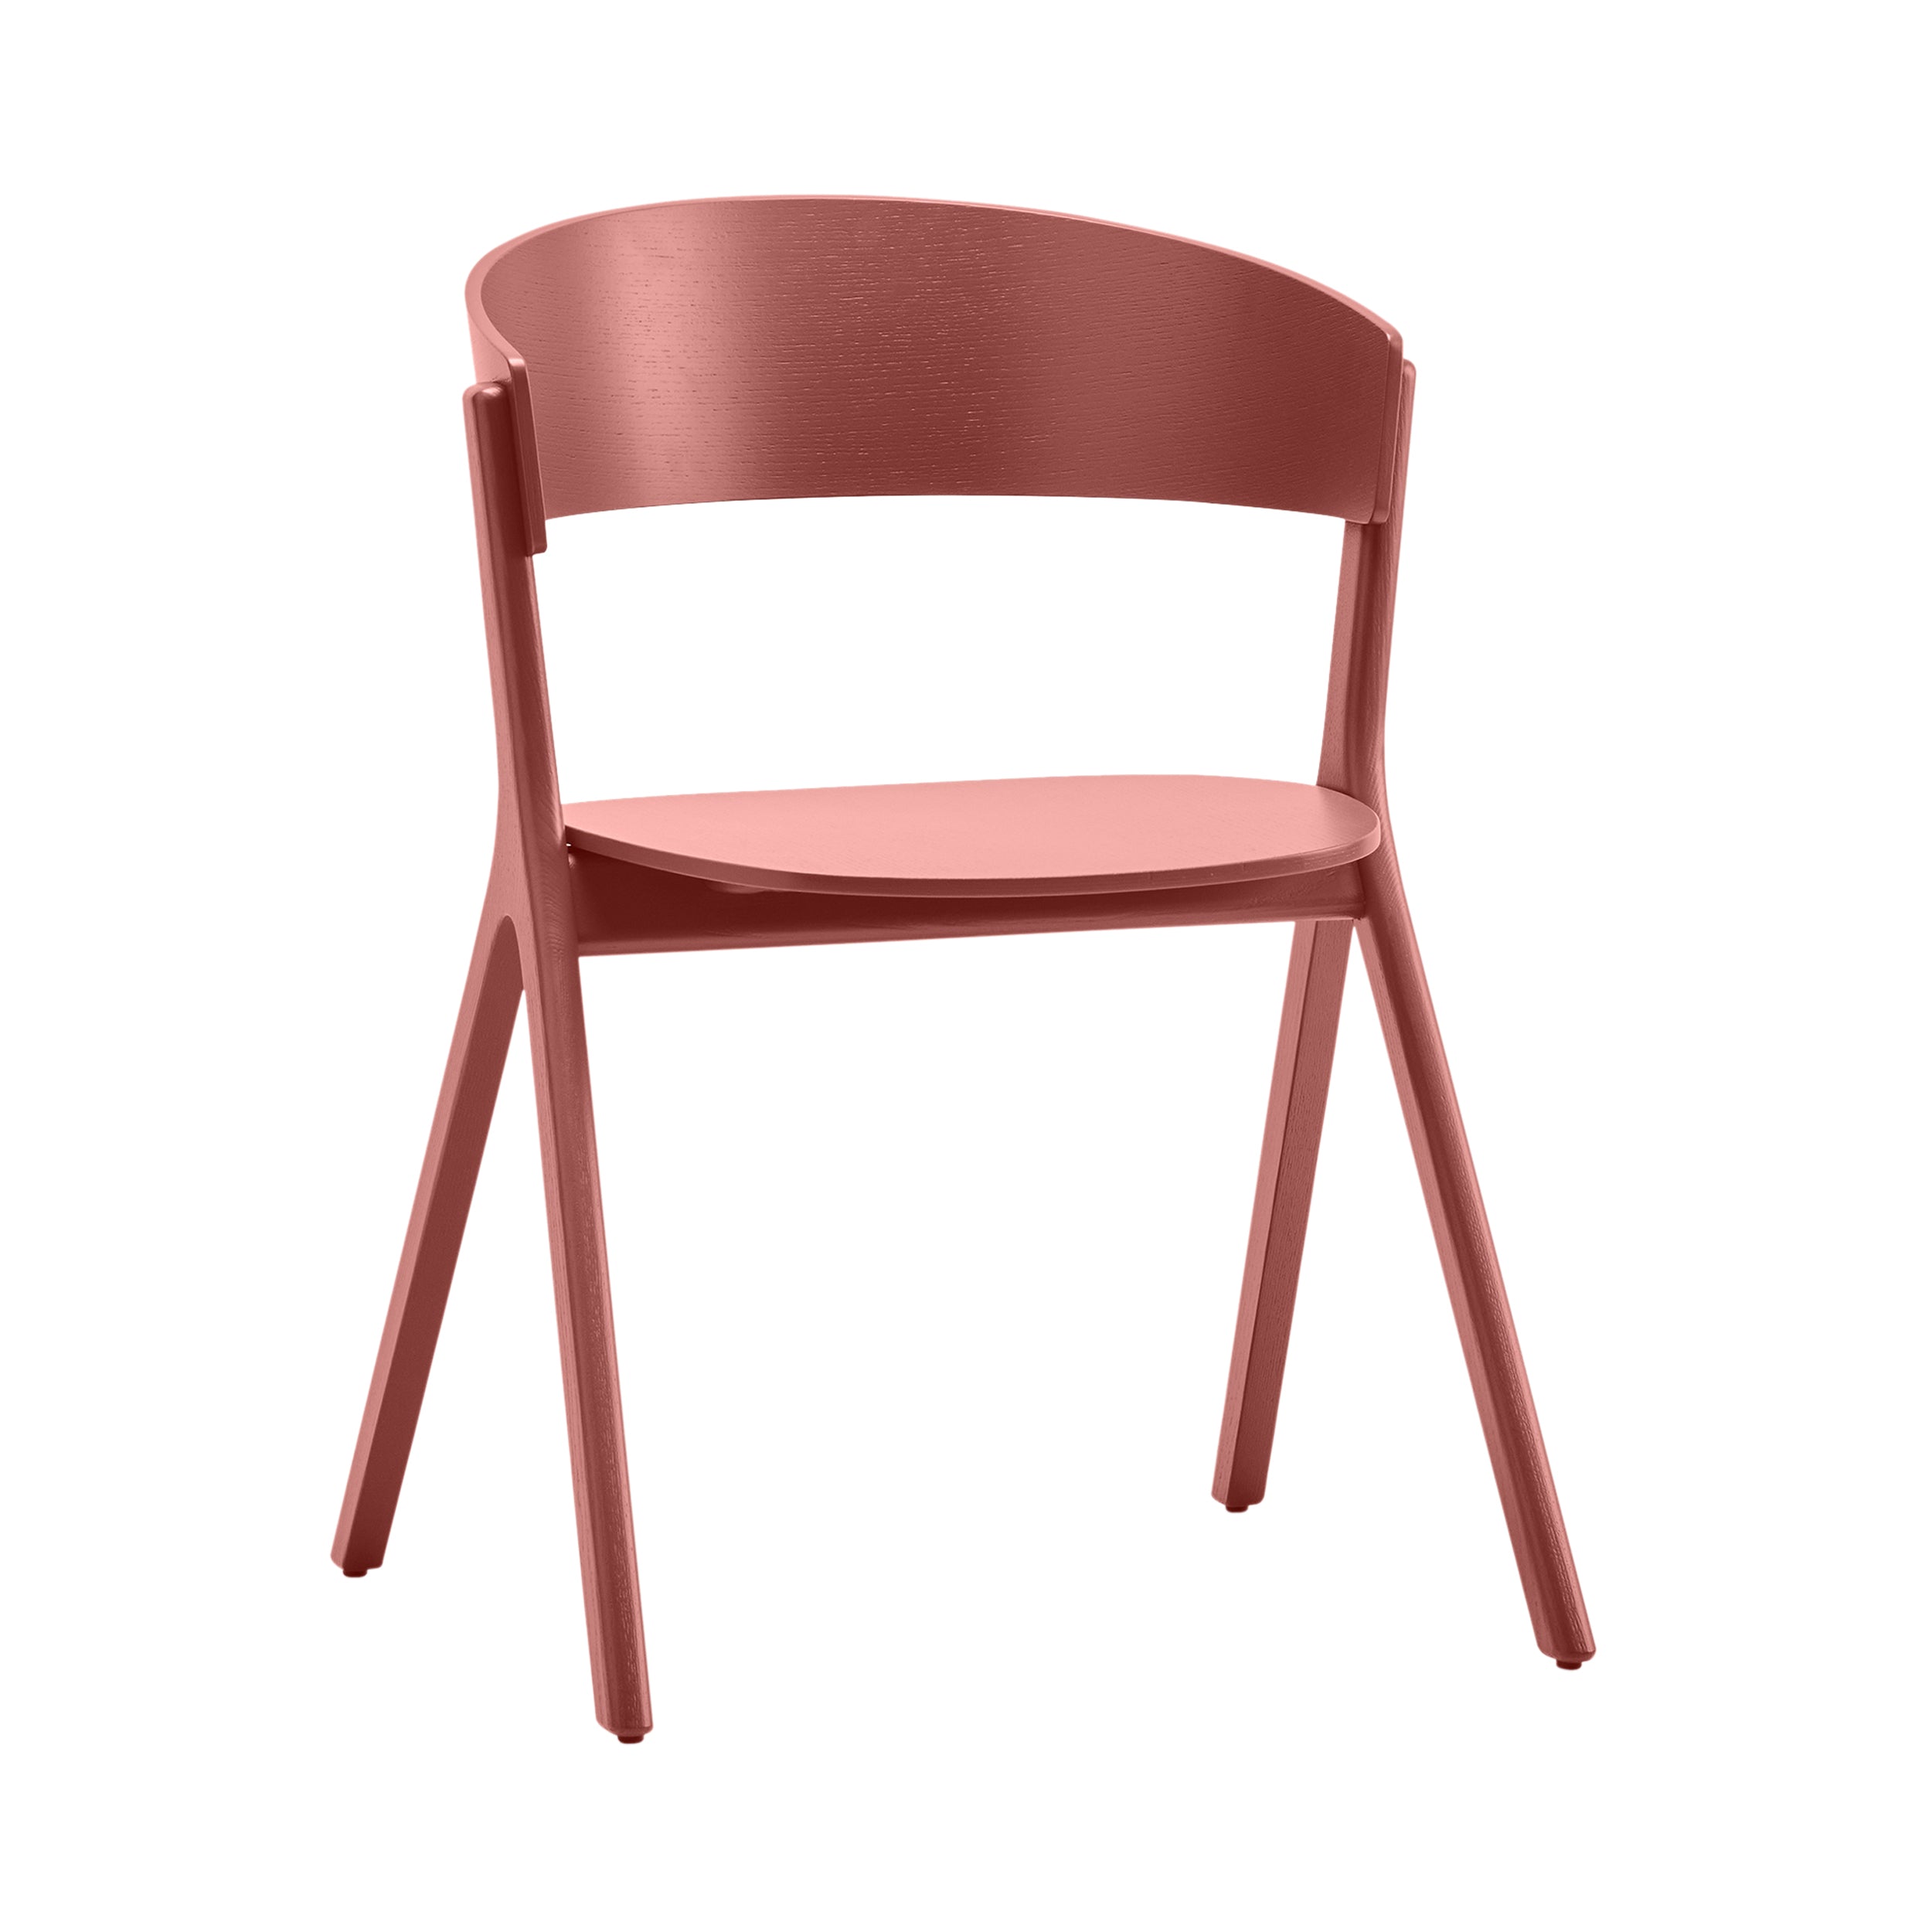 Circus Wood Chair: Japan Red + Without Seat Pad